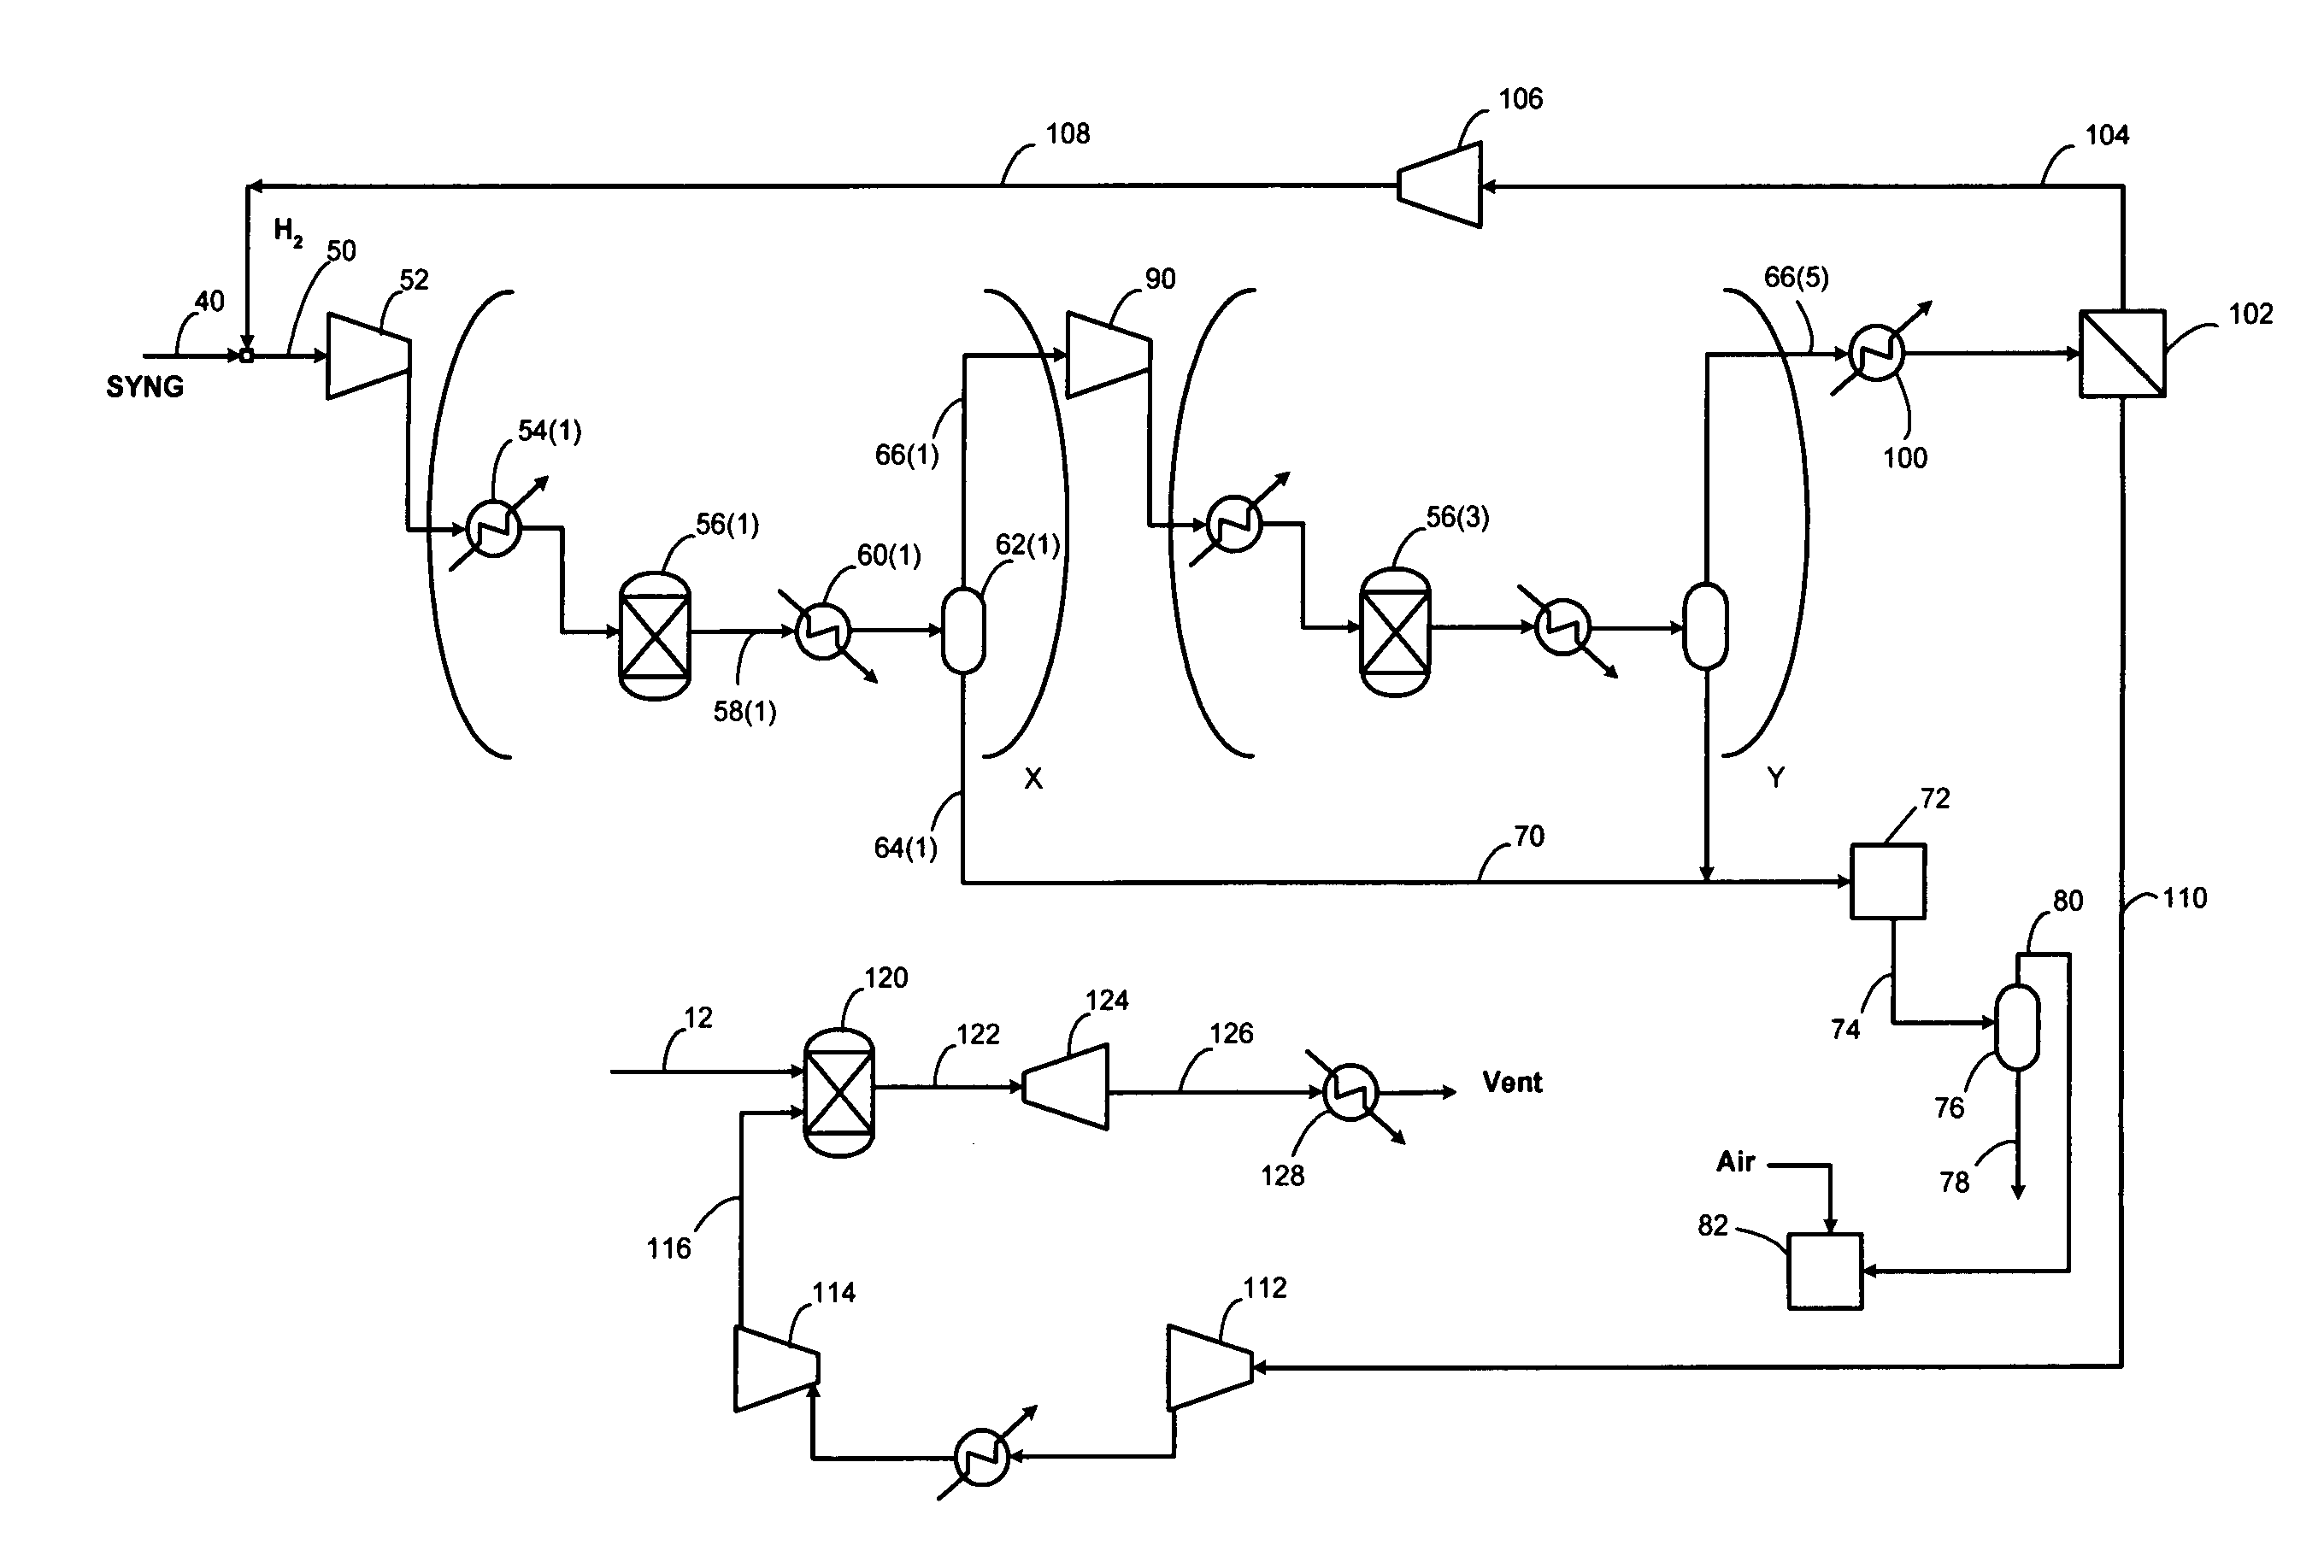 High efficiency process for producing methanol from a synthesis gas